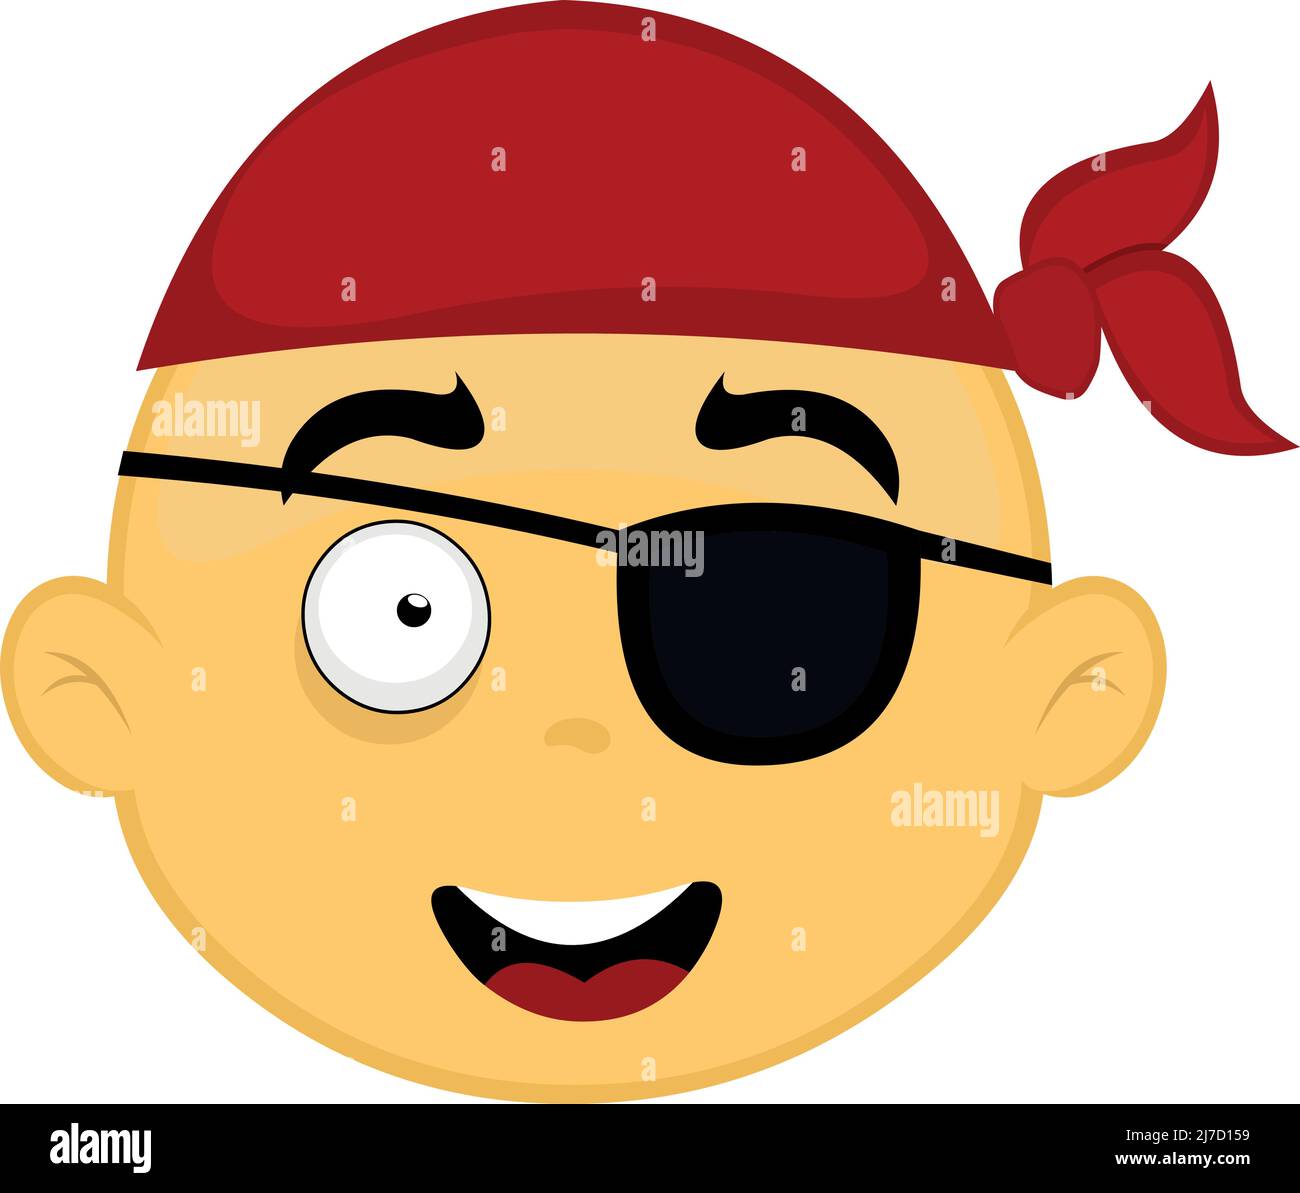 Vector illustration of the face of a pirate character in yellow, with an eye patch and a head scarf Stock Vector